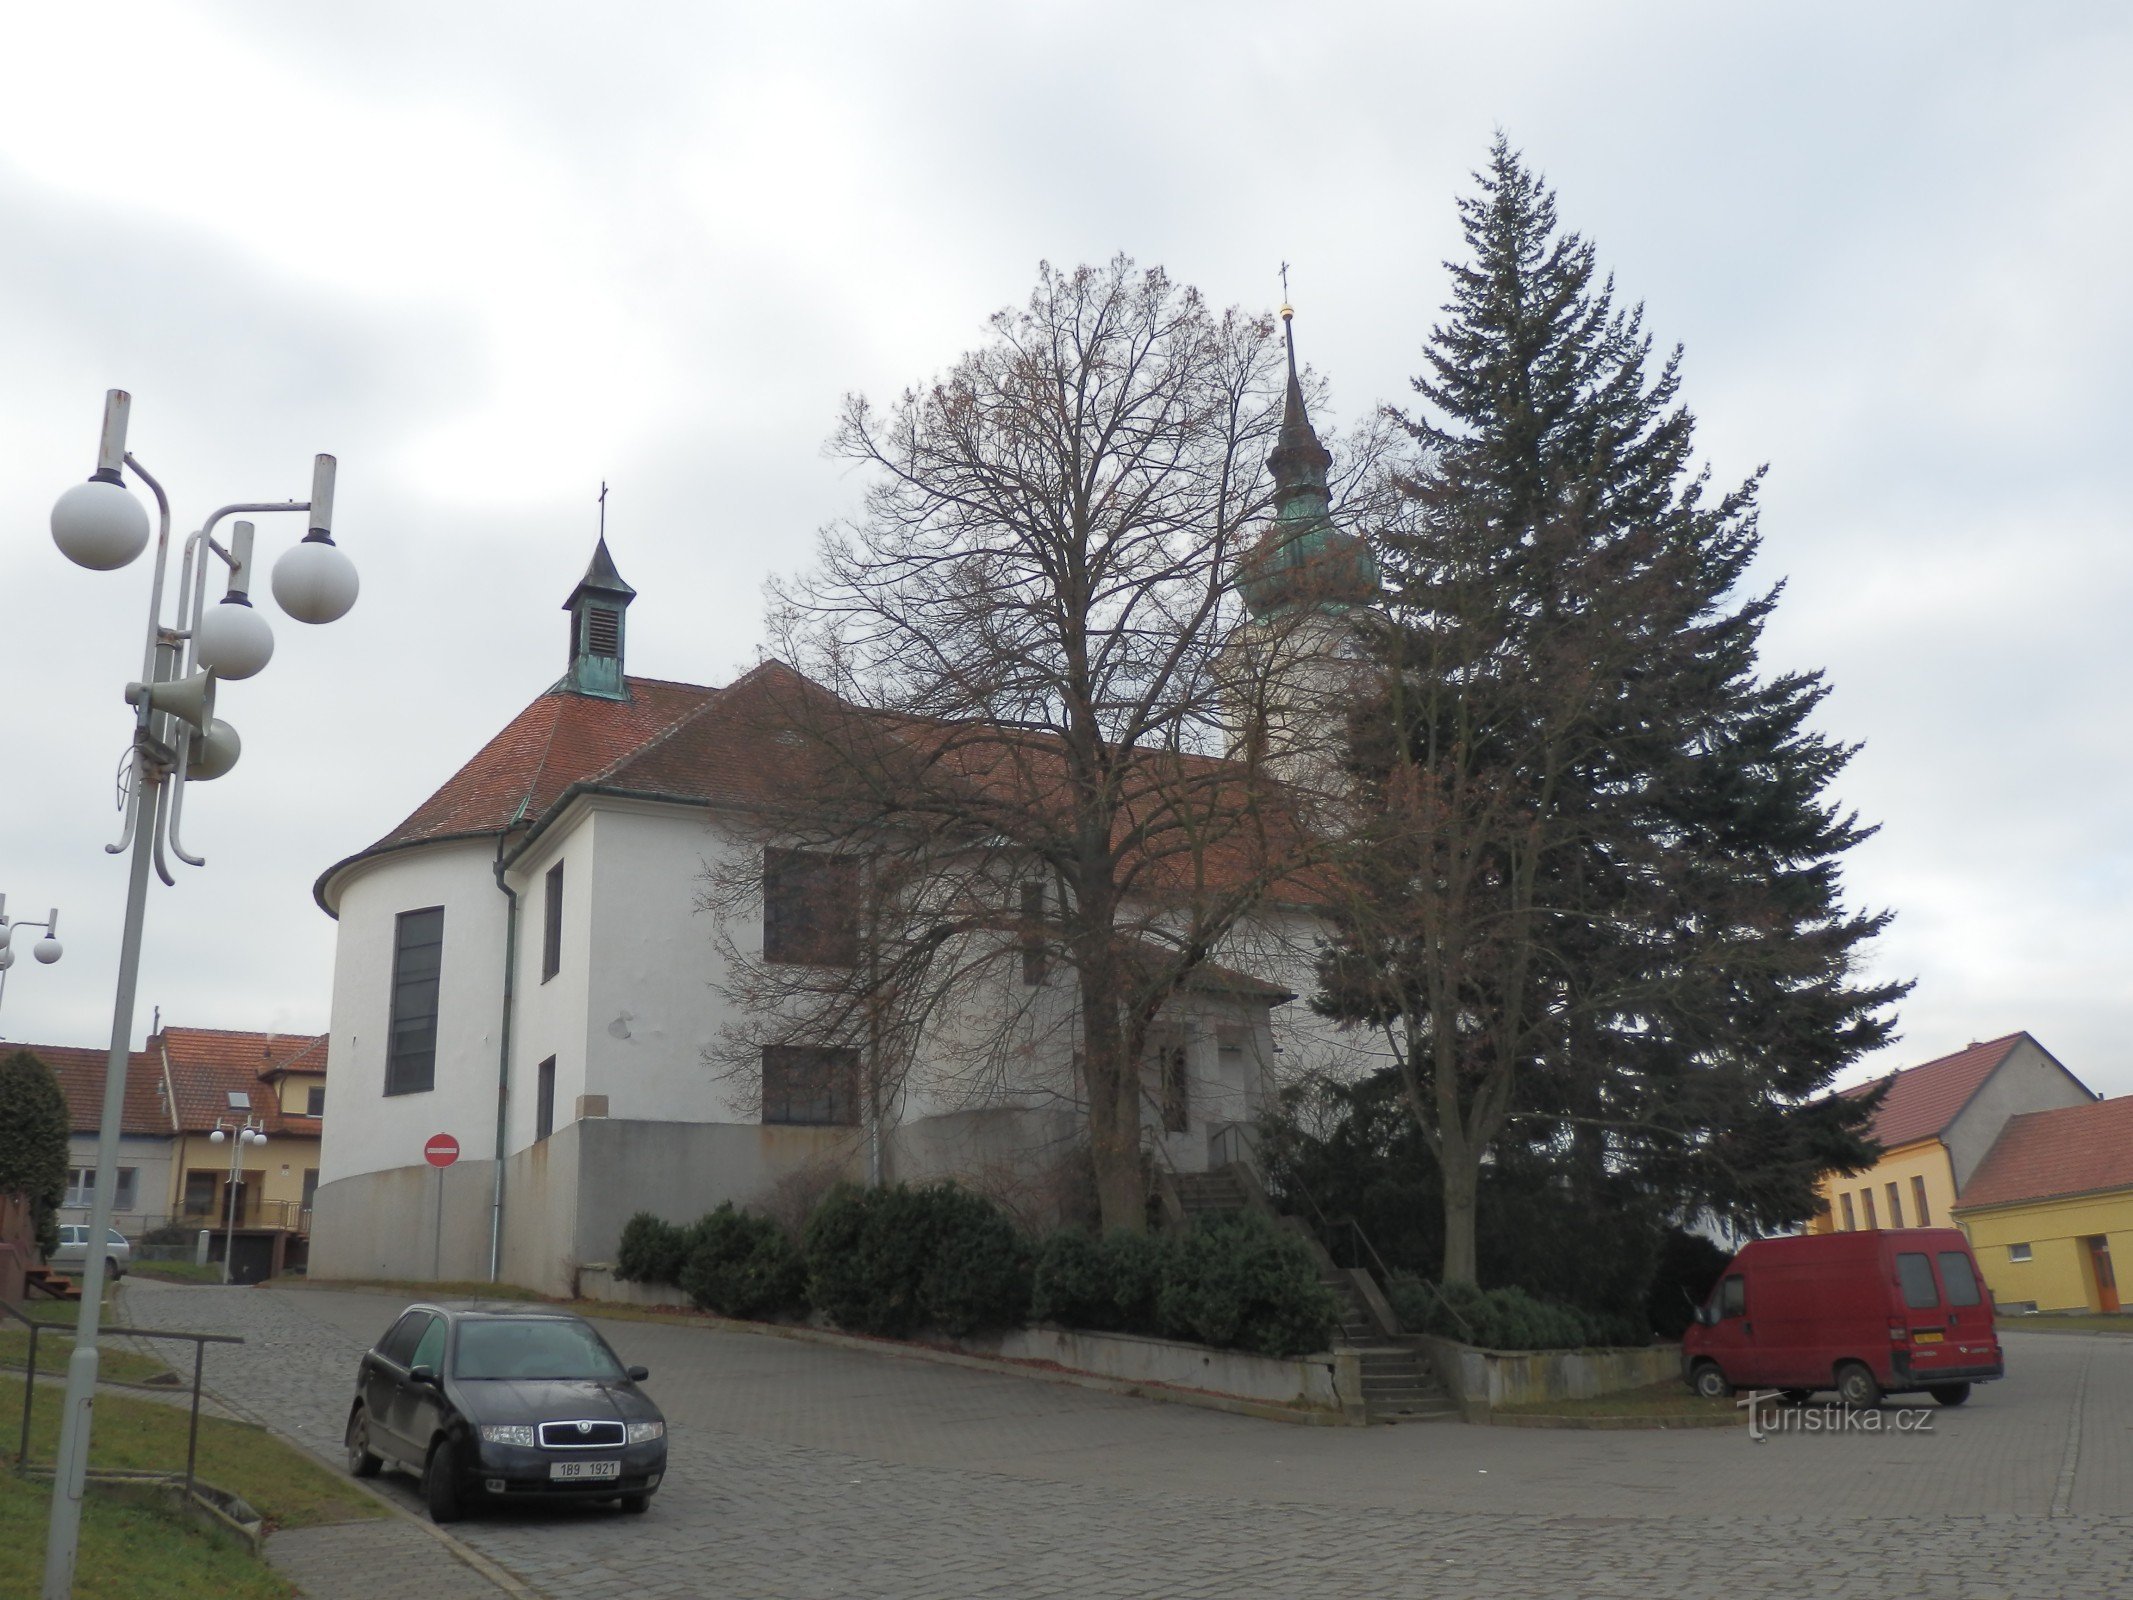 Church of the Holy Trinity in Střelice